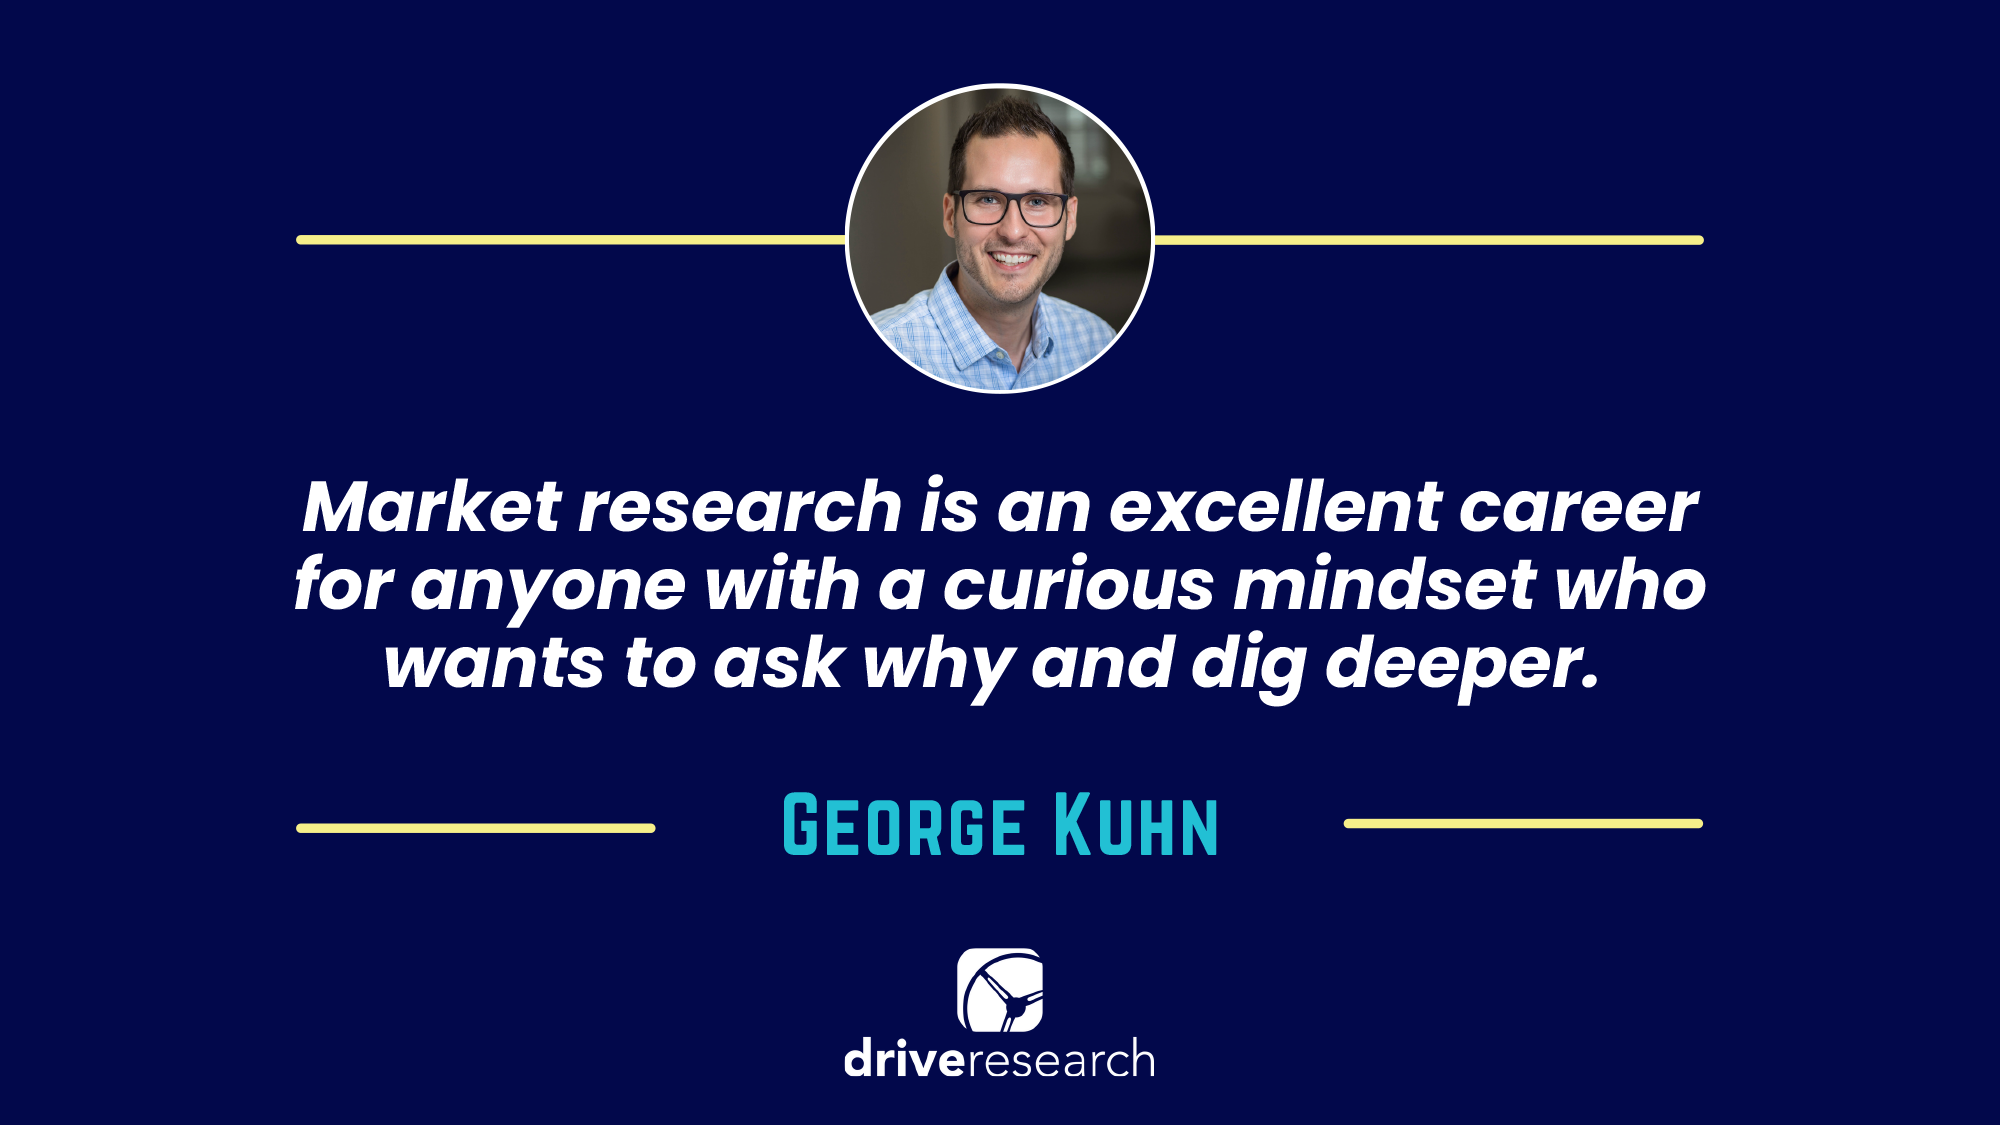 quote about working in market research - george kuhn